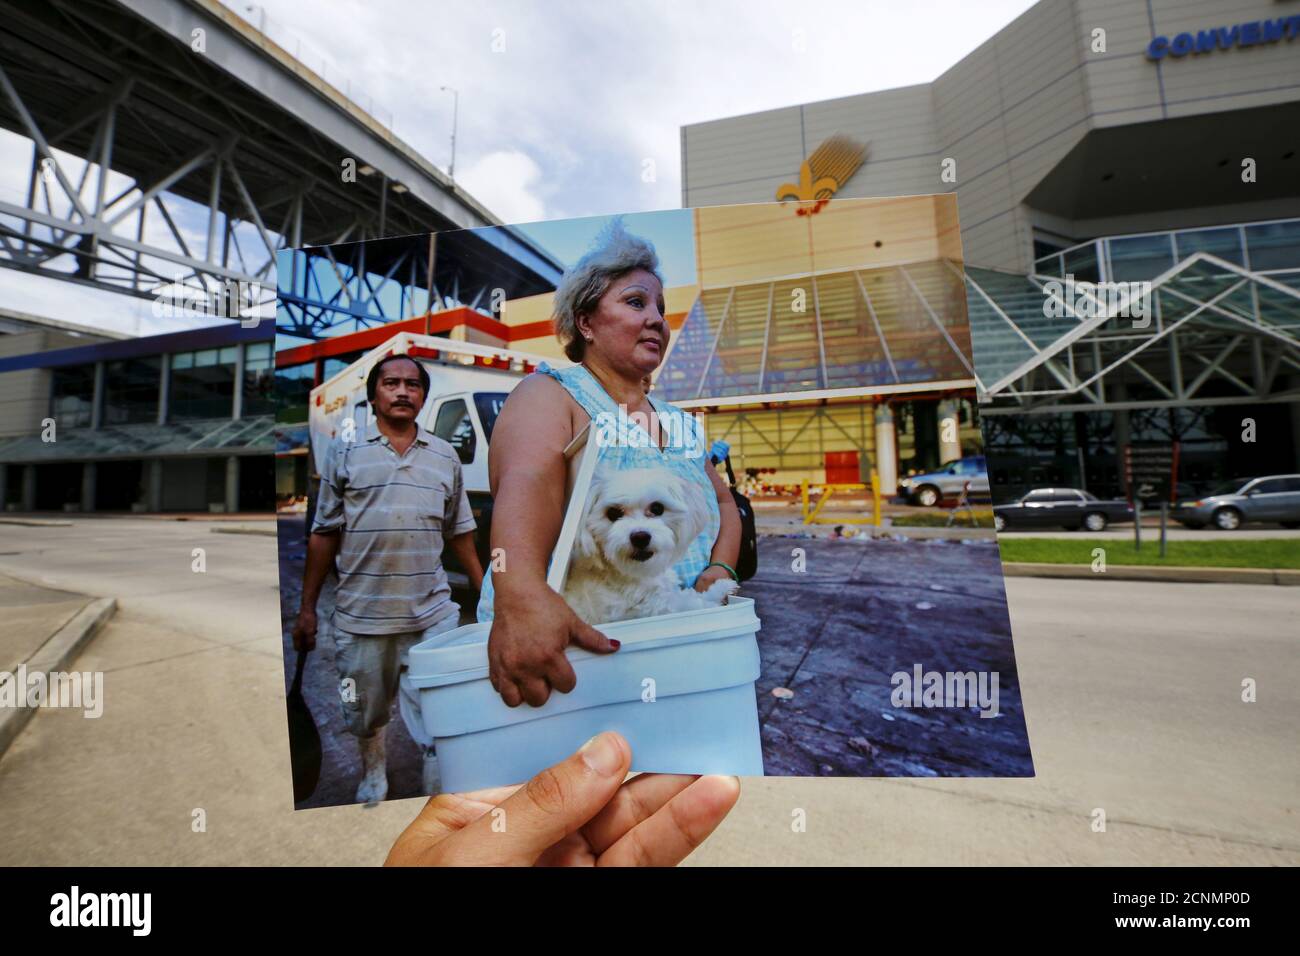 Photographer Carlos Barria holds a print of a photograph he took in 2005, as he matches it up at the same location 10 years on, in New Orleans, United States, August 17, 2015. The print shows a woman arriving with her dog at a collection point for victims of Hurricane Katrina, September 8, 2005. In 2005, Hurricane Katrina triggered floods that inundated New Orleans and killed more than 1,500 people as storm waters overwhelmed levees and broke through floodwalls. Congress authorised spending more than $14 billion to beef up the city's flood protection after Katrina and built a series of new bar Stock Photo